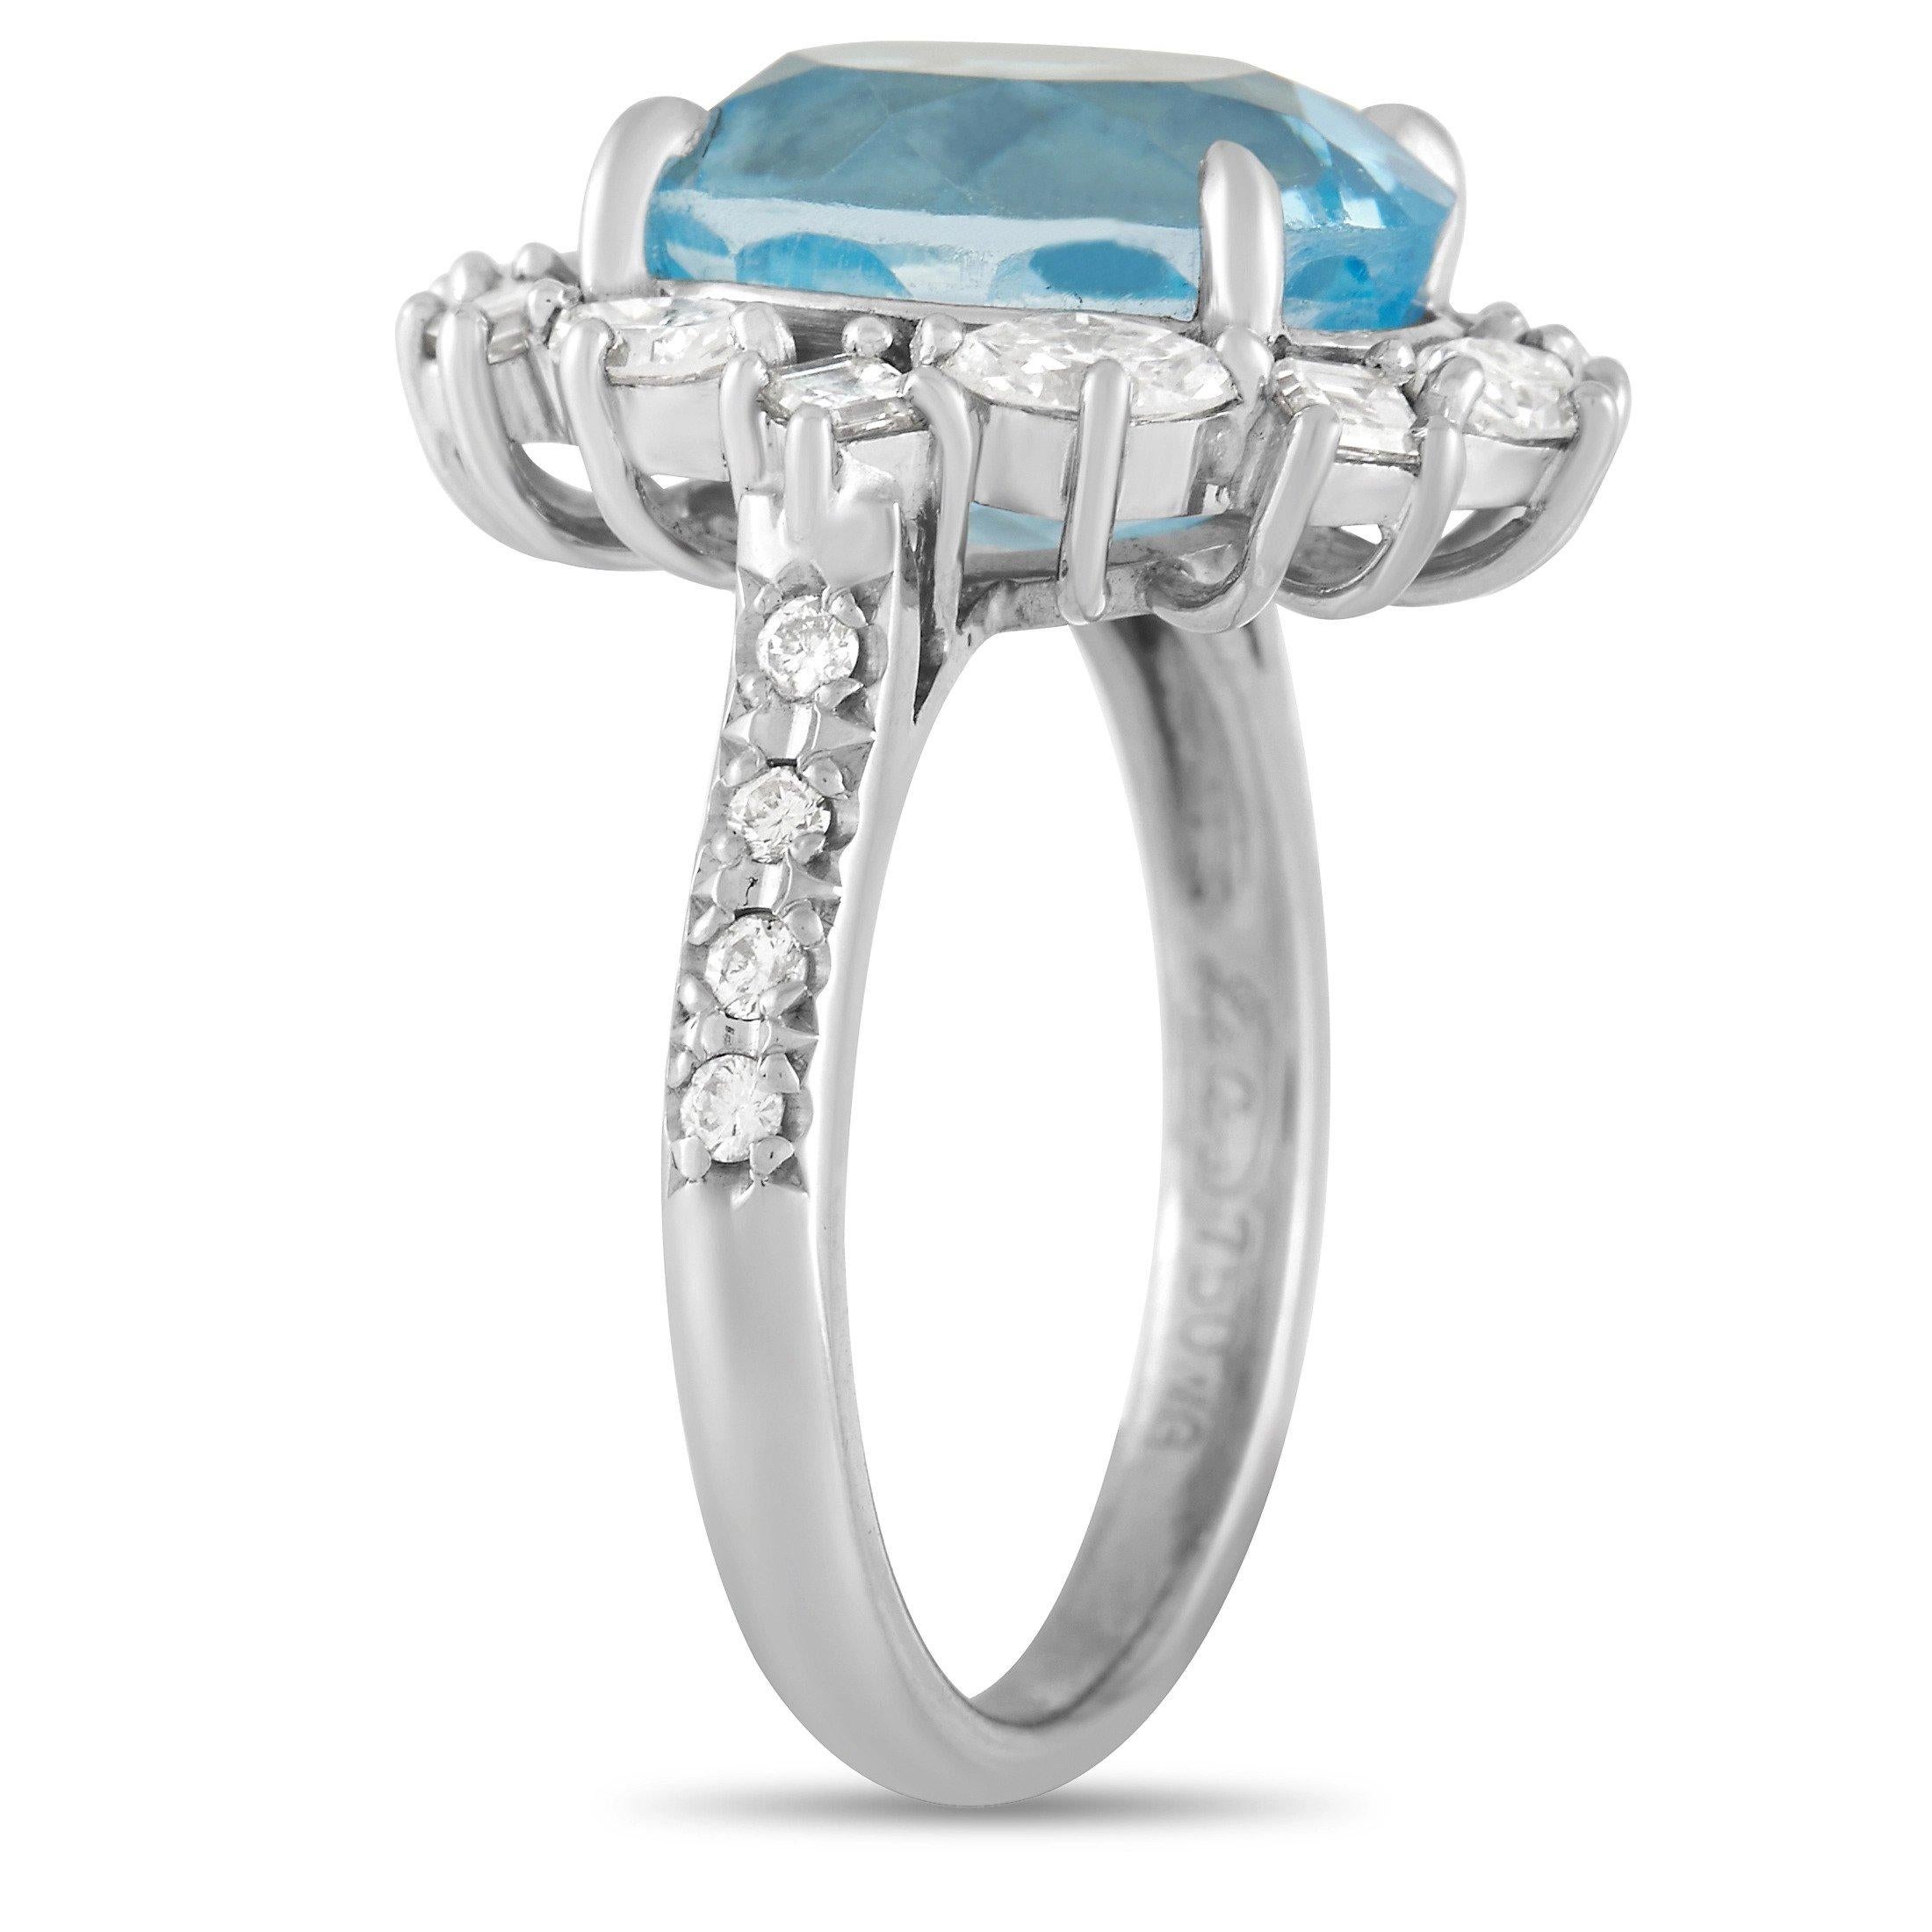 A sparkling blue 6.54 carat Topaz center stone makes this elegant ring simply sensational. Glittering diamonds totaling 0.93 carats accent the halo and 2mm wide band of this 18K White Gold ring, which features a stylish 7mm top height. 
 
 This